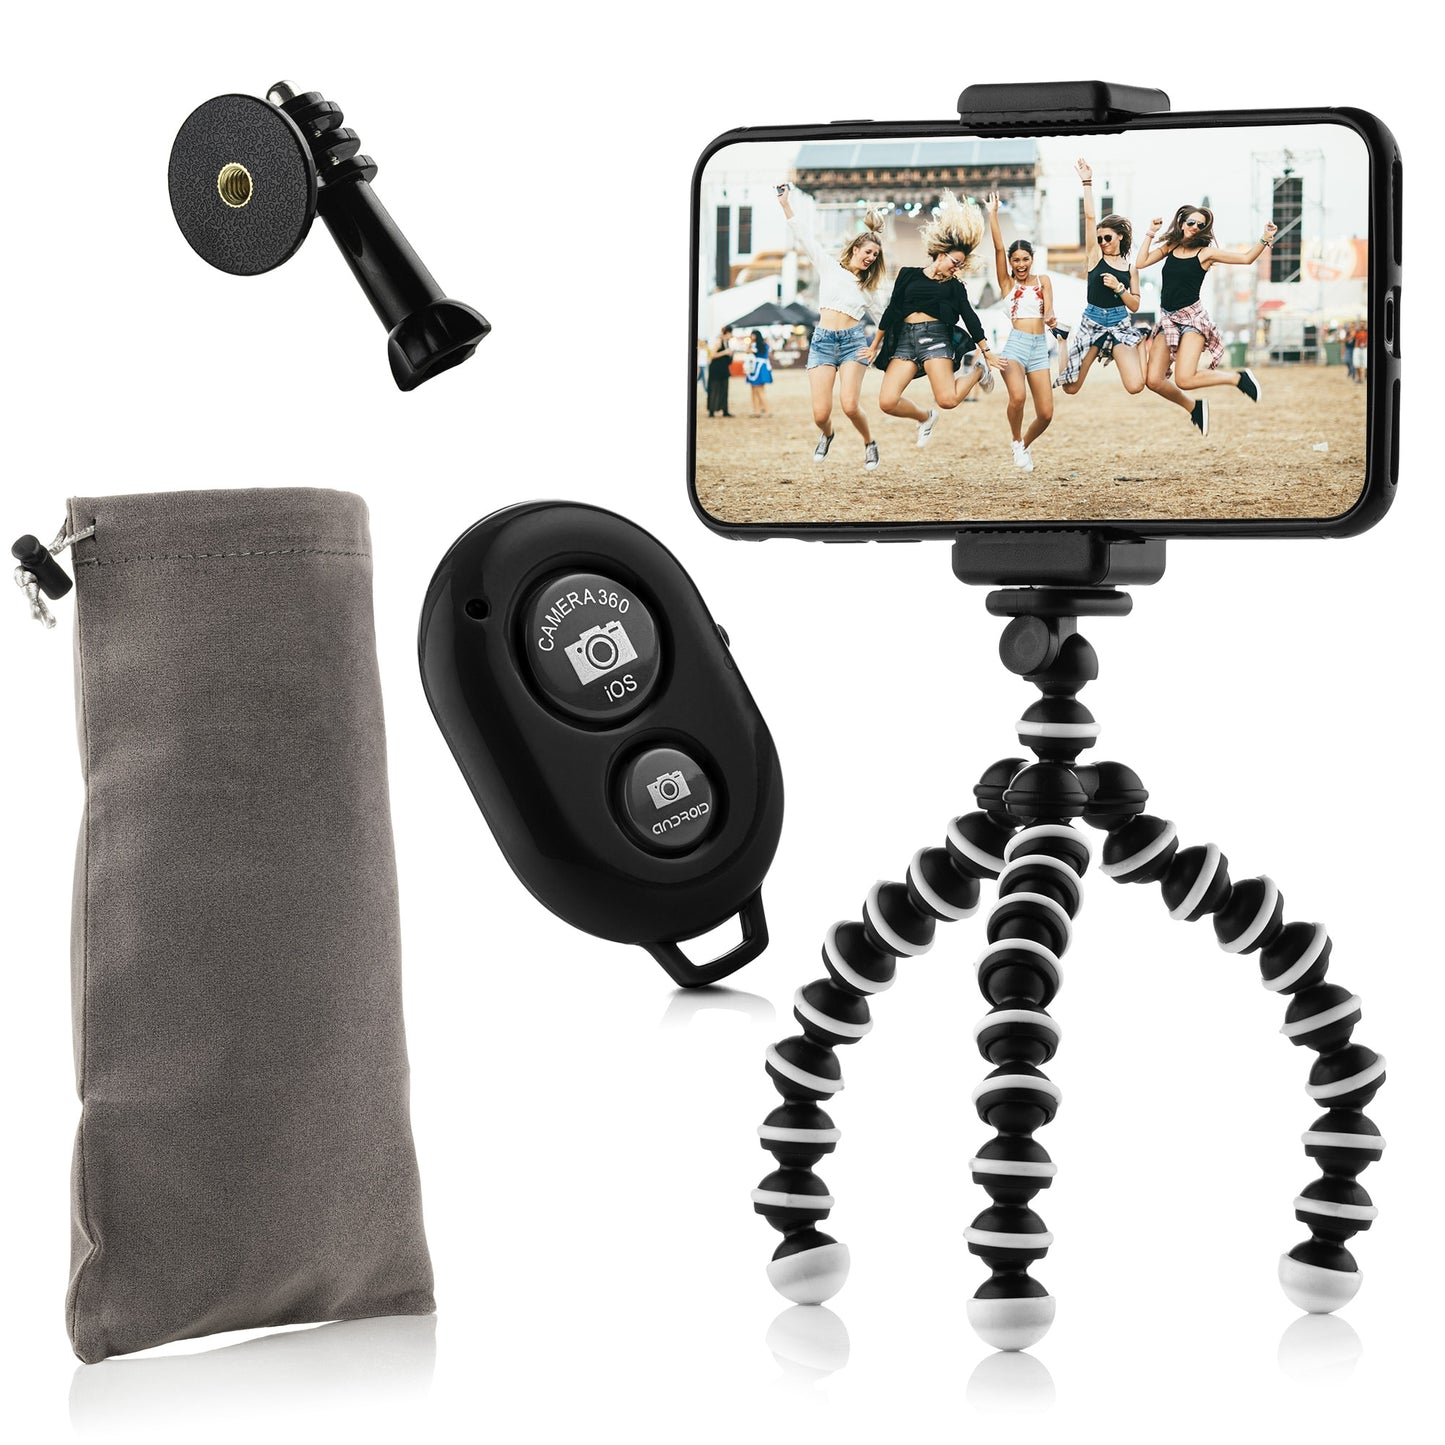 Flexible tripod with extra flexible legs SET: includes phone holder, bluetooth remote shutter, GoPro mount adapter & storage bag